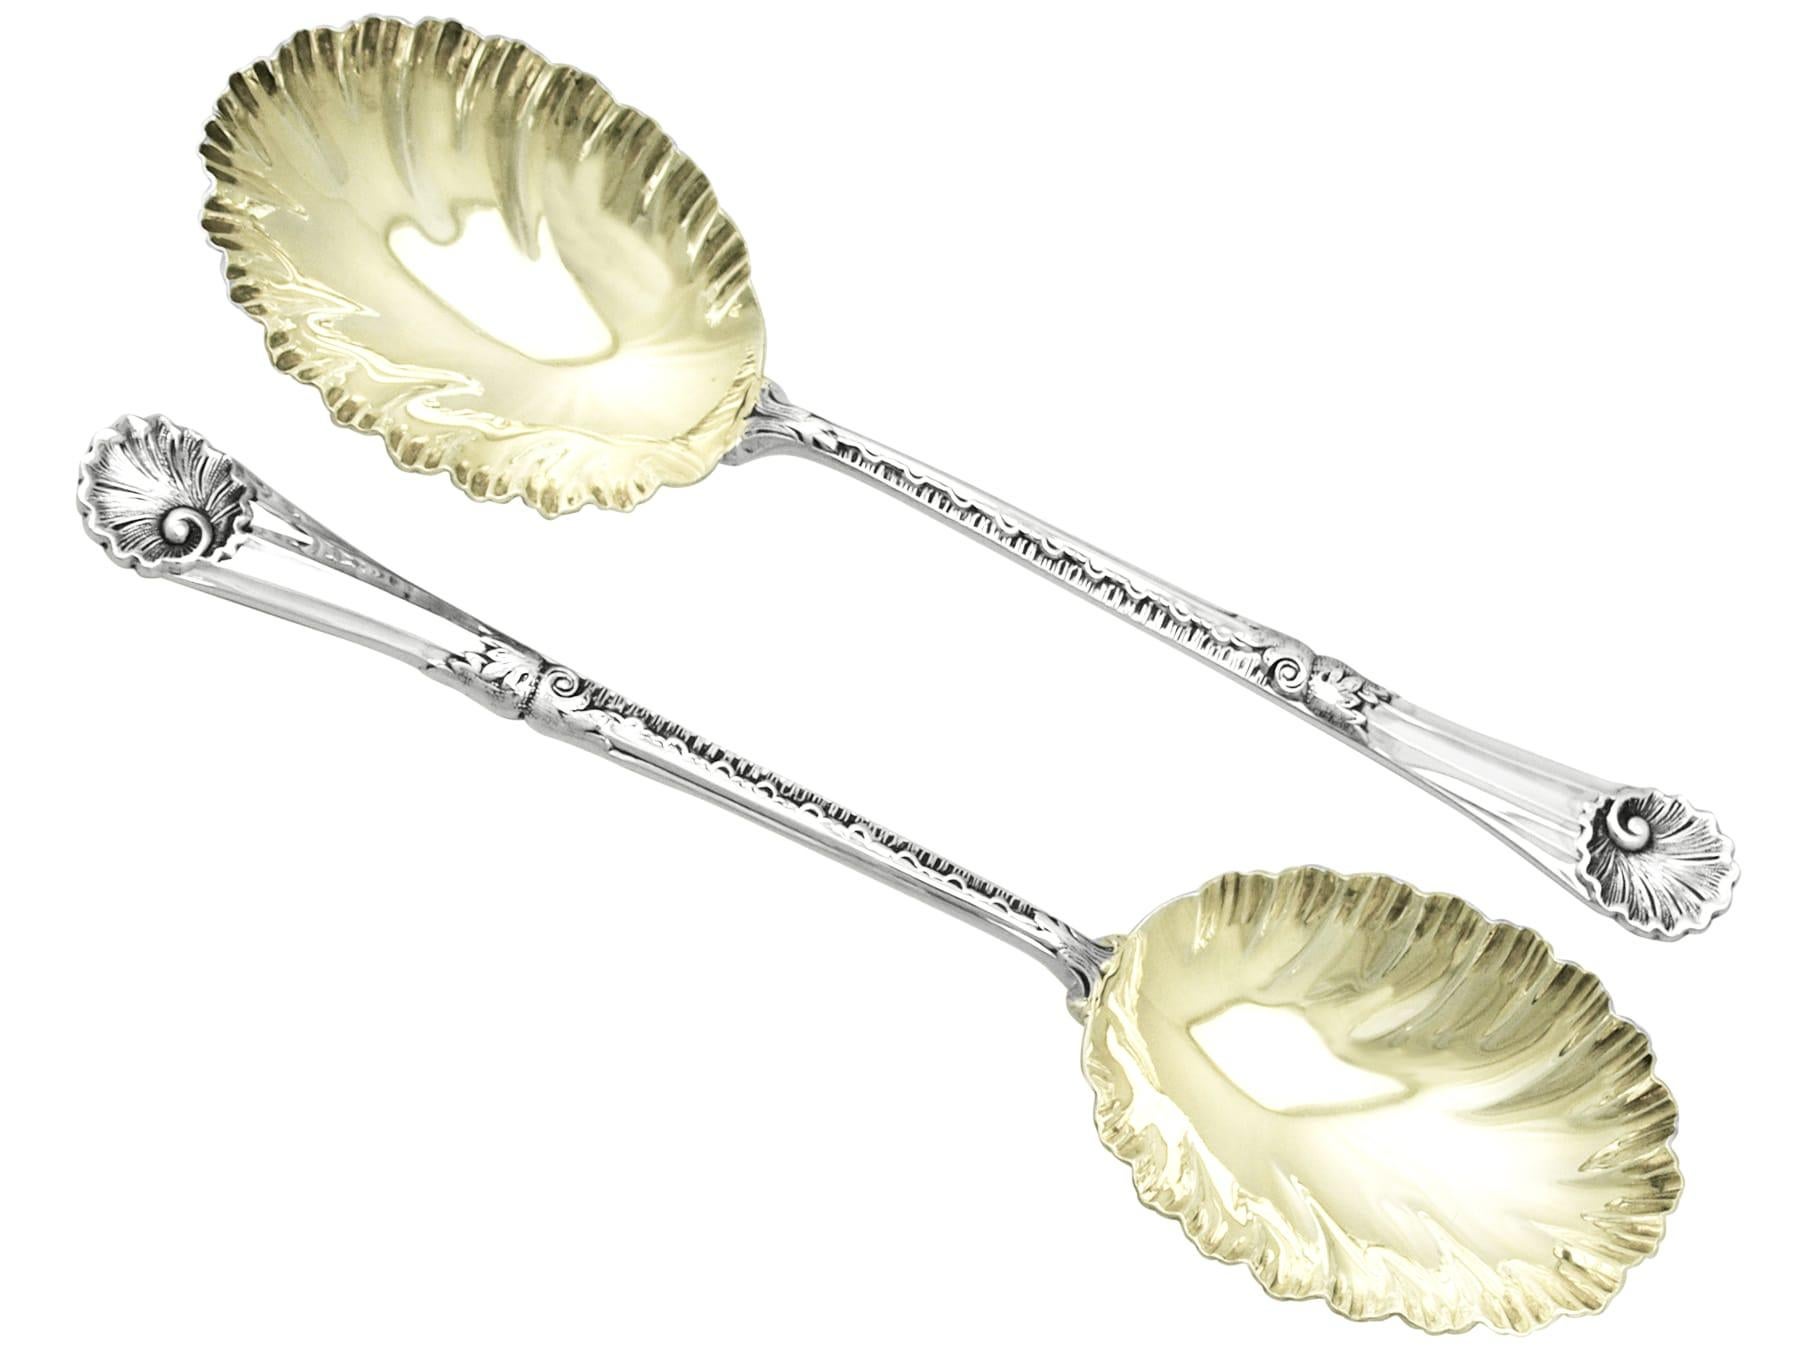 A fine and impressive pair of antique Victorian English sterling silver fruit spoons - boxed; an addition to our silver flatware collection.

These fine antique Victorian sterling silver fruit spoons have embossed shell shaped bowls onto tapering